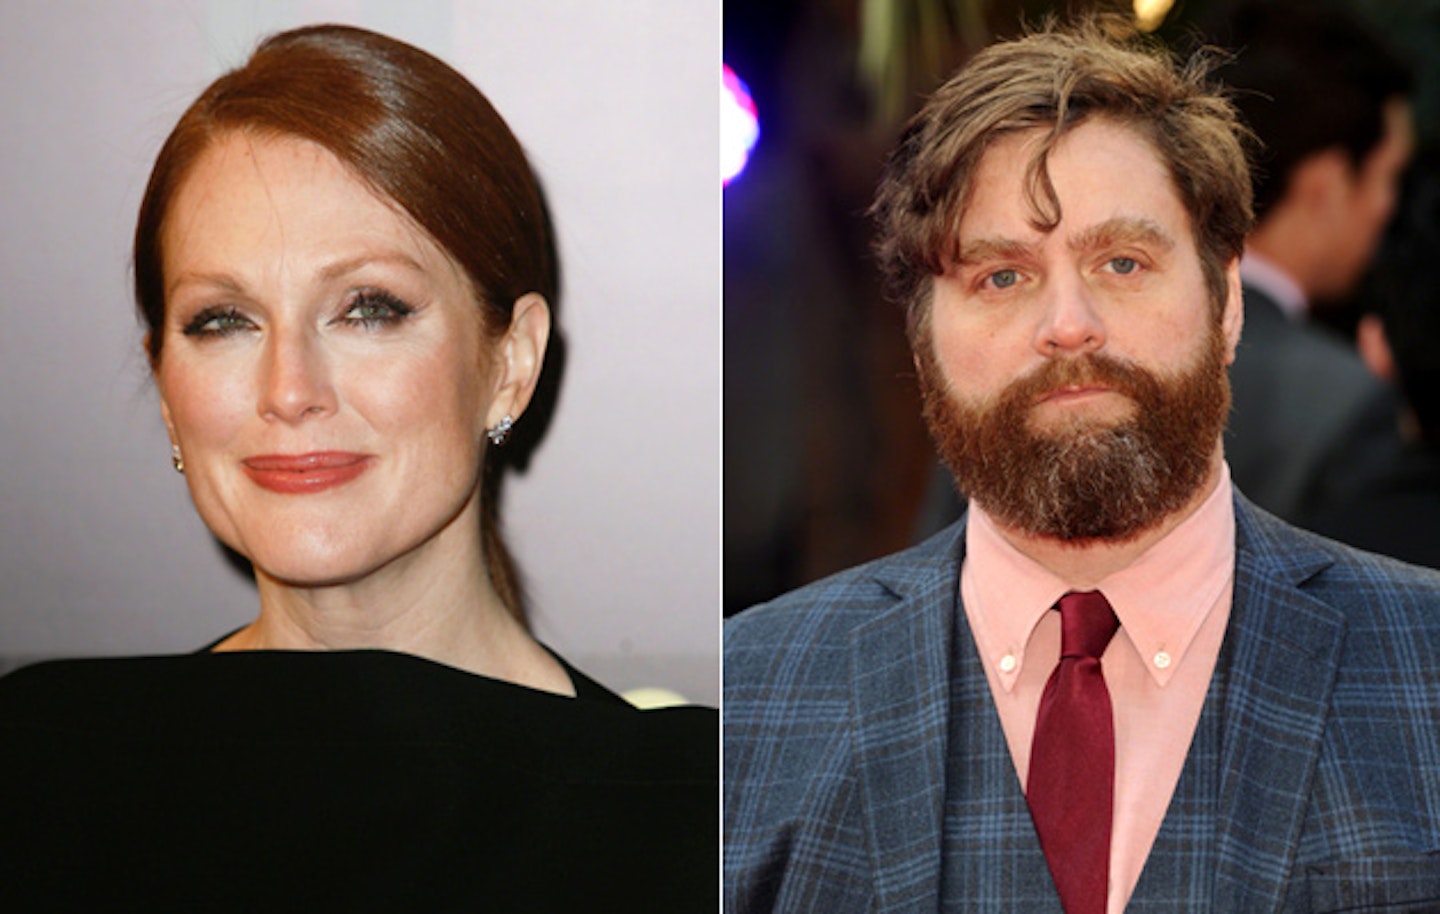 Julianne-Moore-and-Zach-Galifianakis-are-freeheld